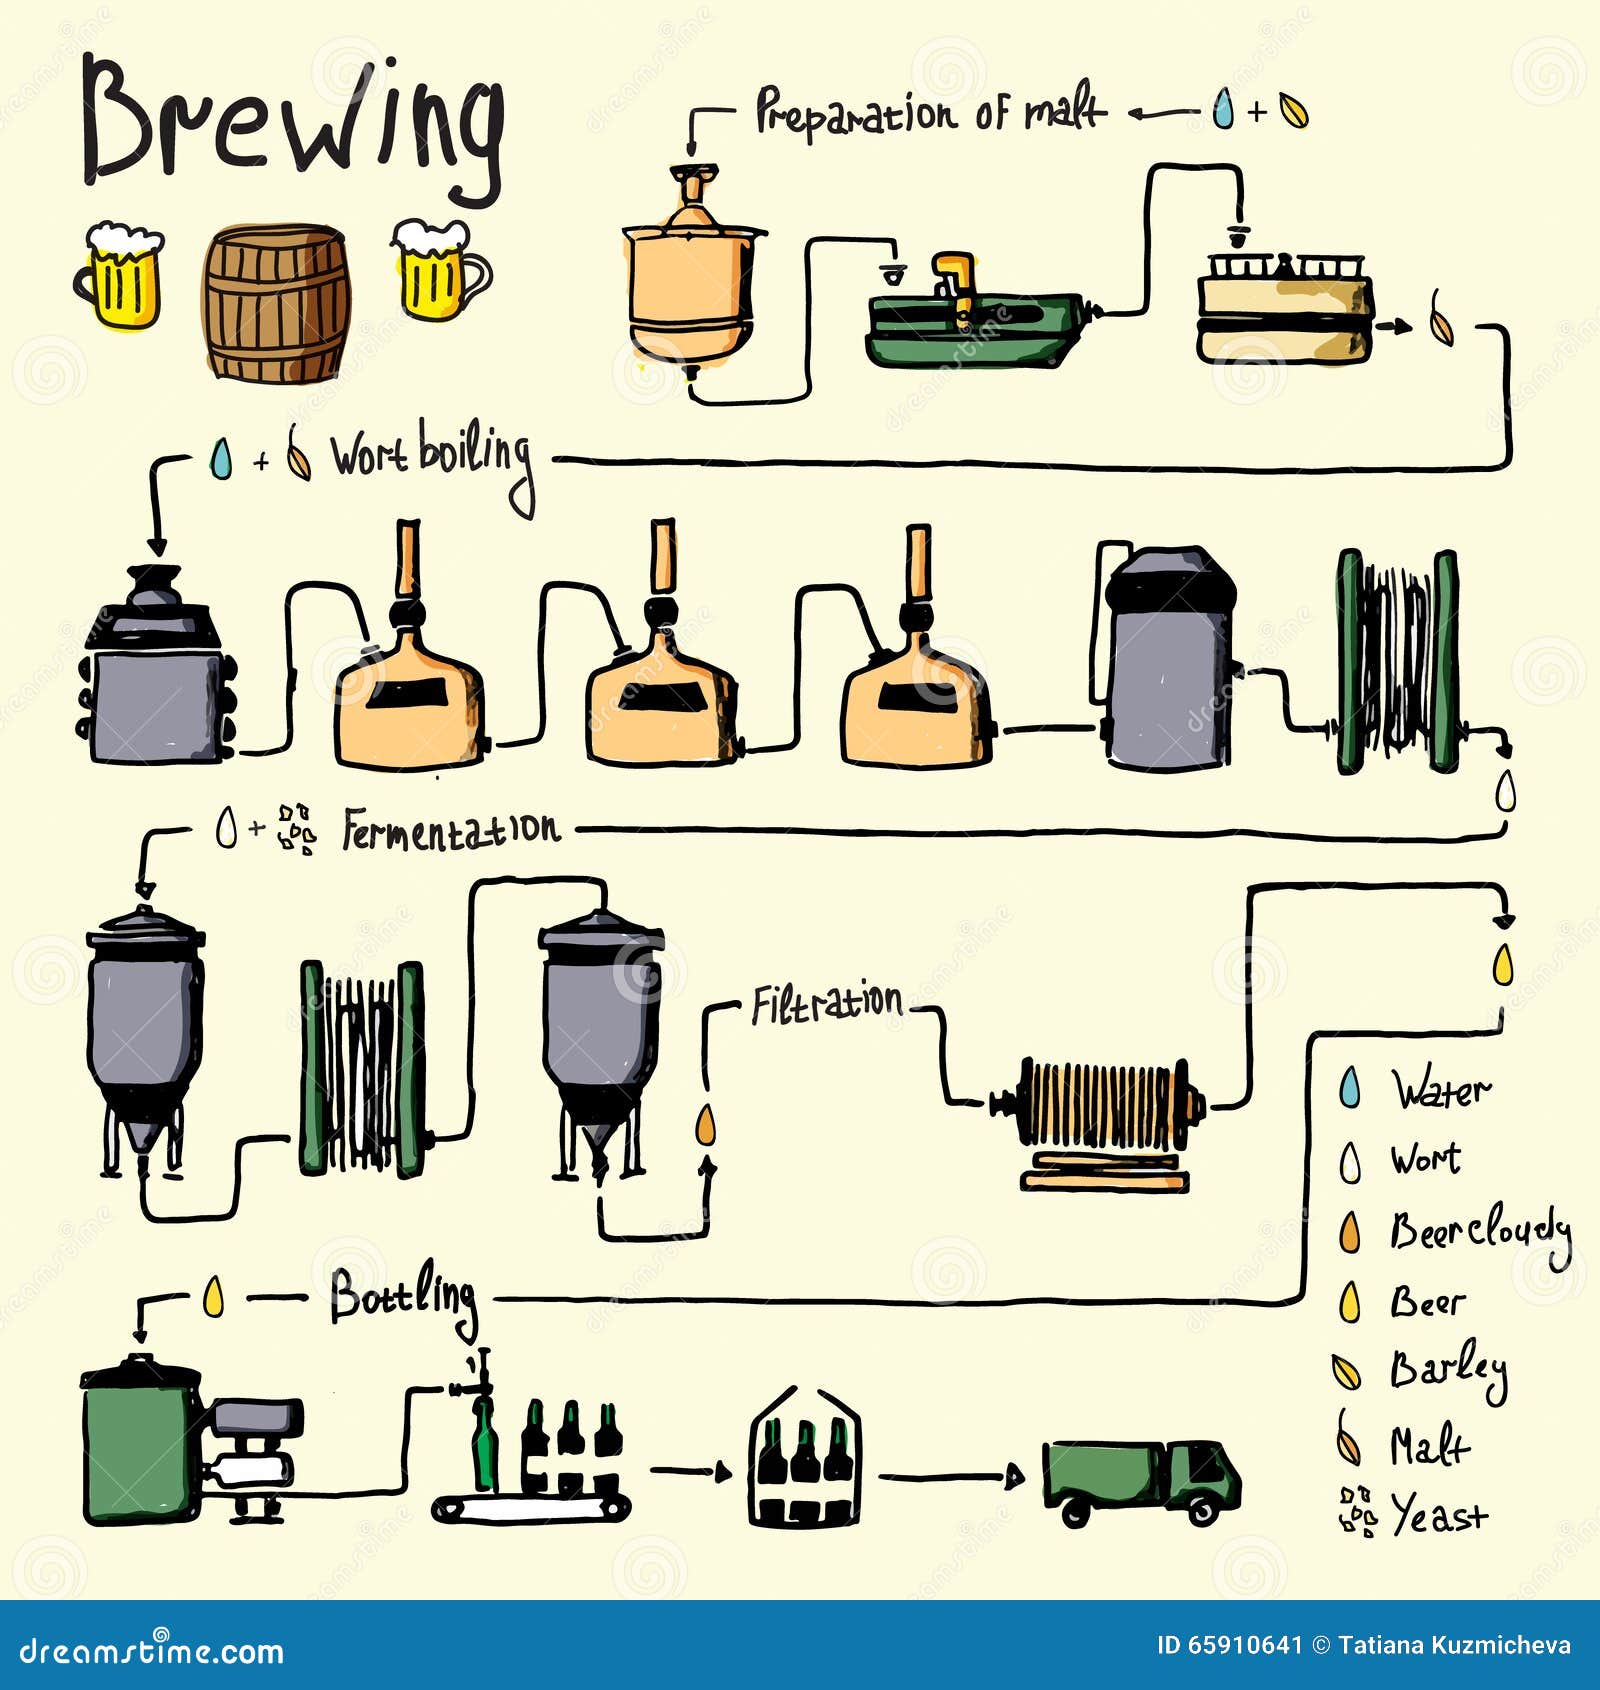 Process of manufacturing beer